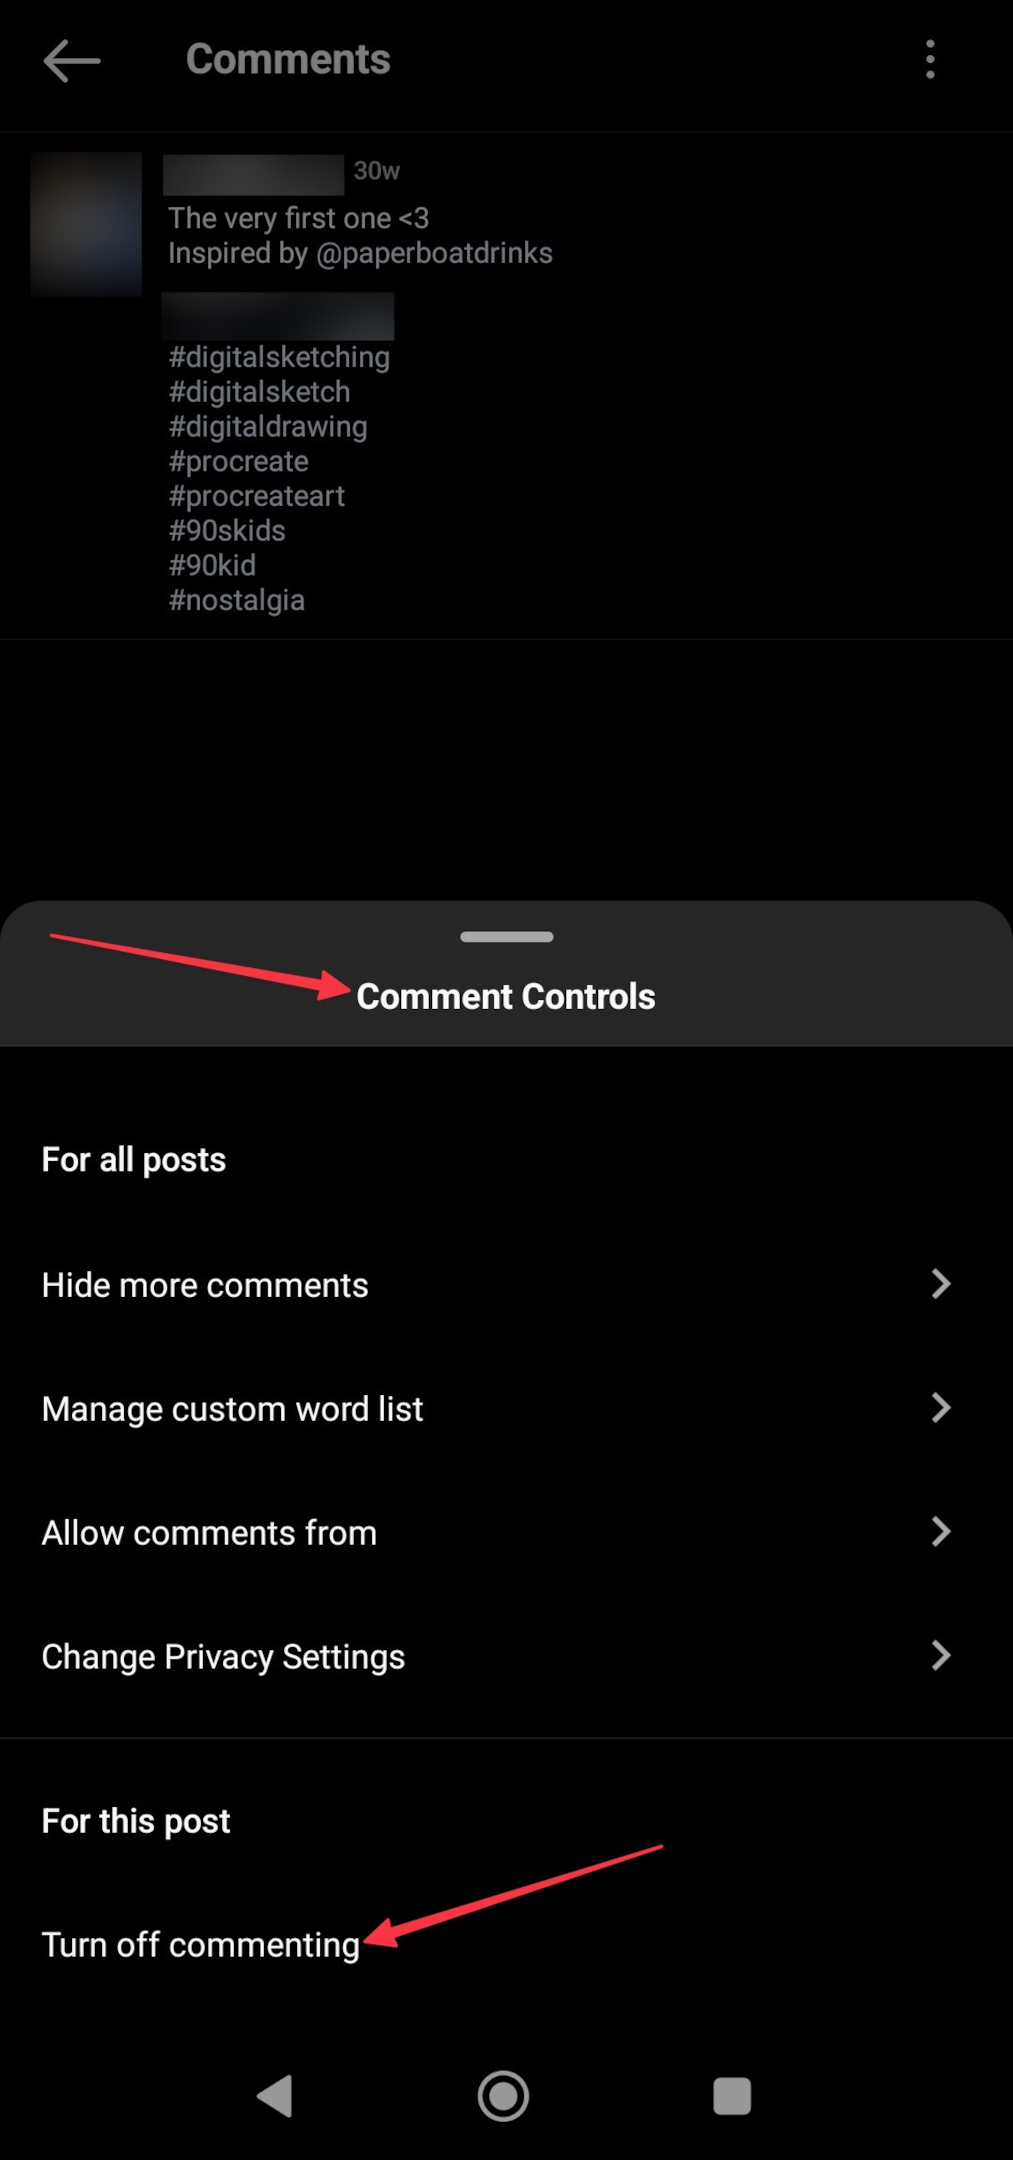 Remote.tools shows how to turn off commenting on Instagram posts